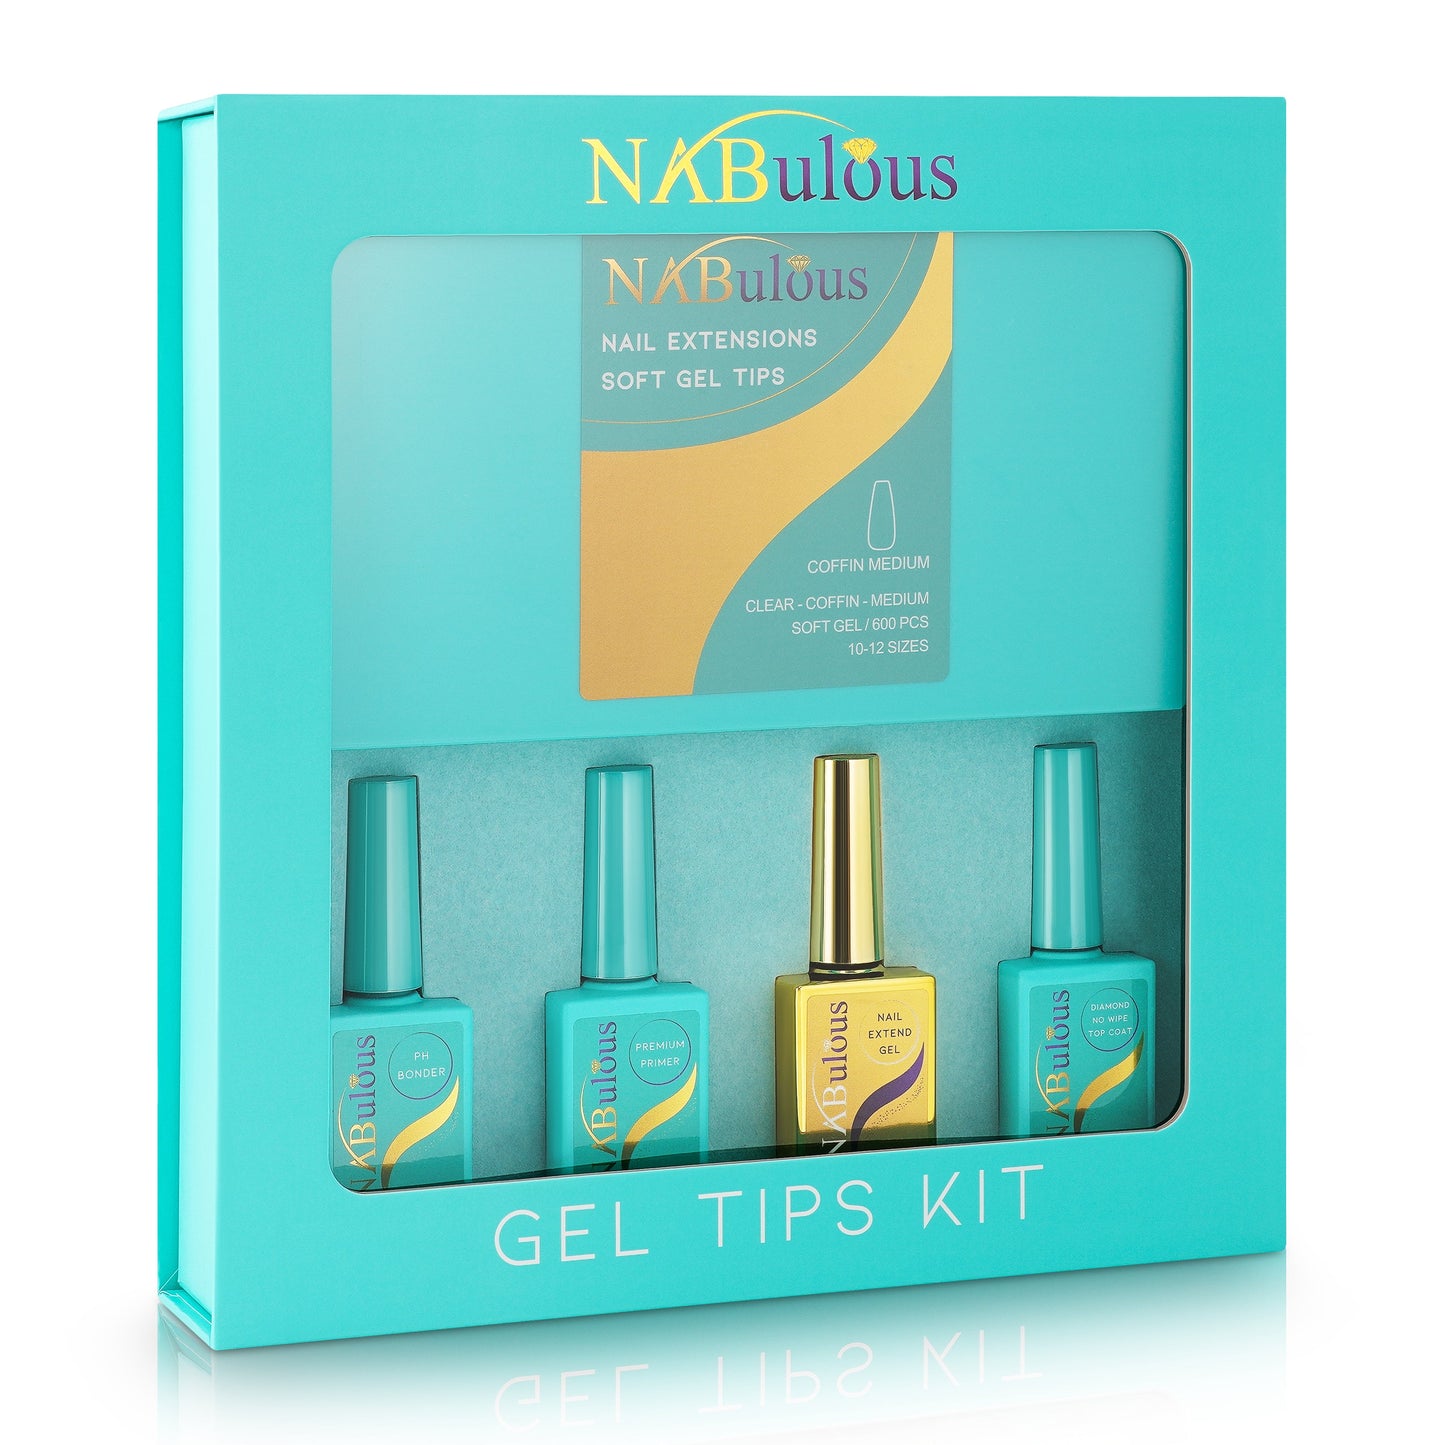 Get Salon-Quality Nails with the NABulous Soft Gel Nail Tip Kit